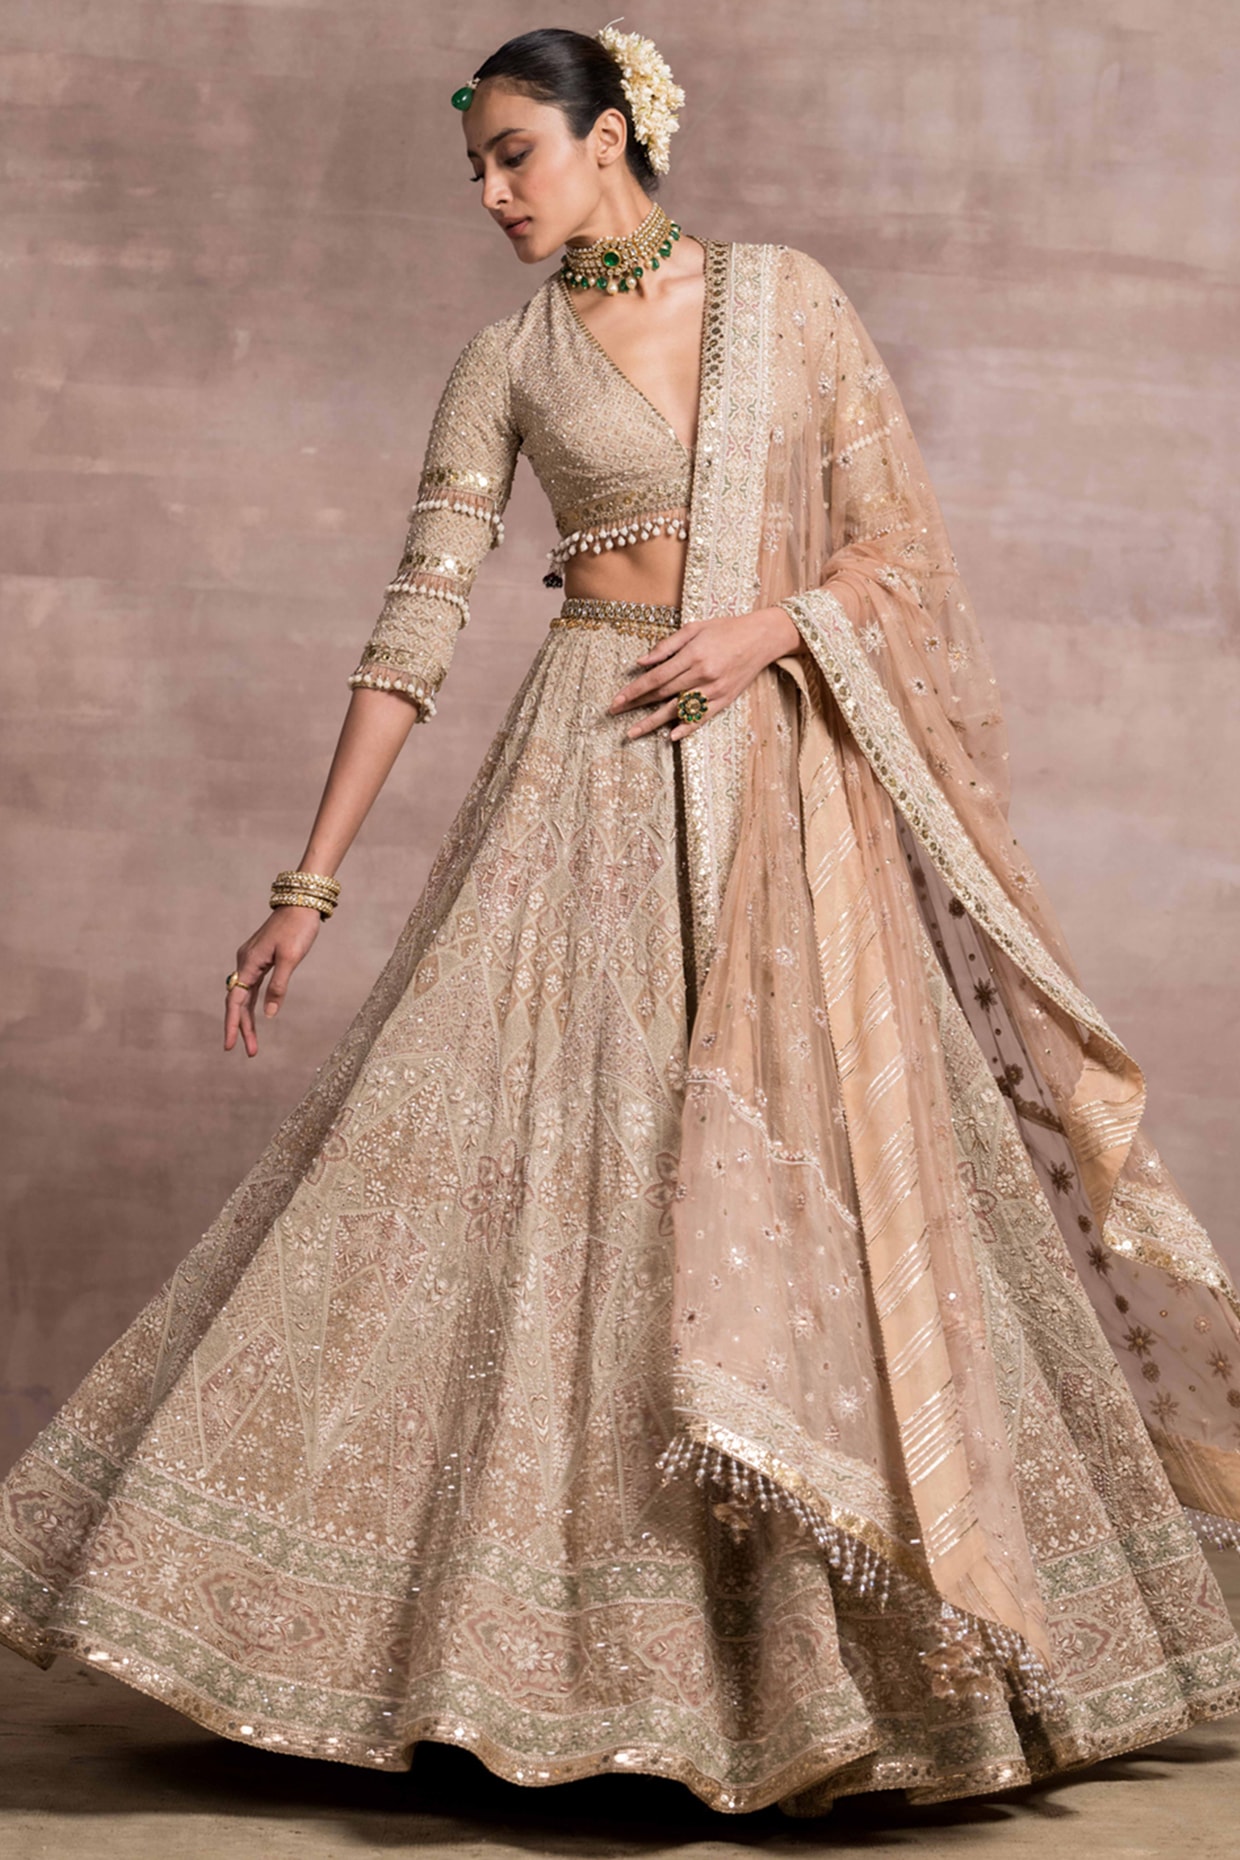 Wedding Special Cover: Model Sneha Ghosh flaunts four looks from Tarun  Tahiliani's bridal designs